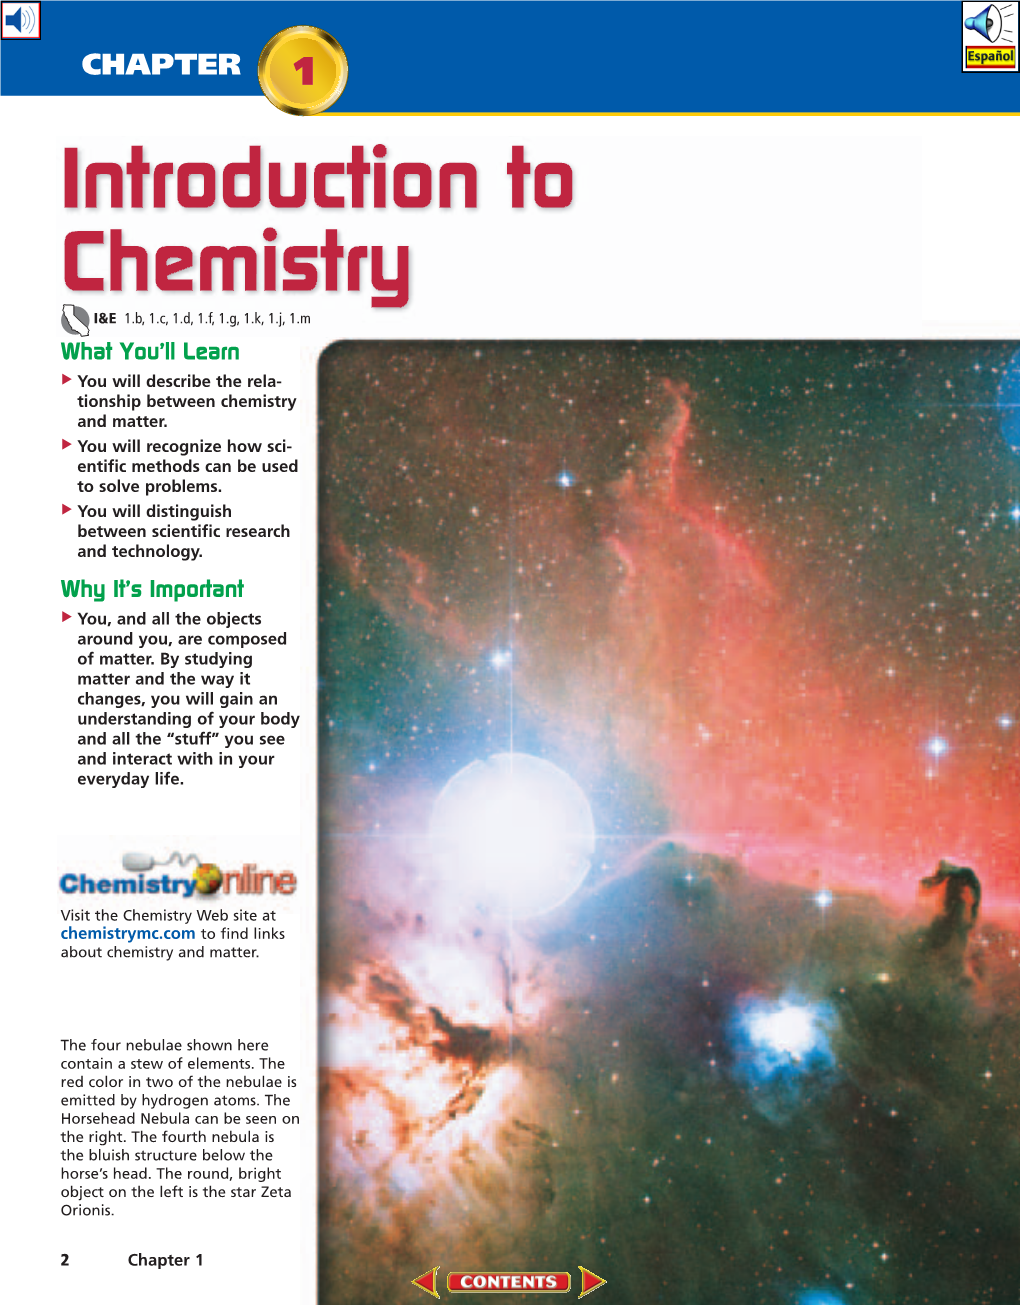 Chapter 1: Introduction to Chemistry